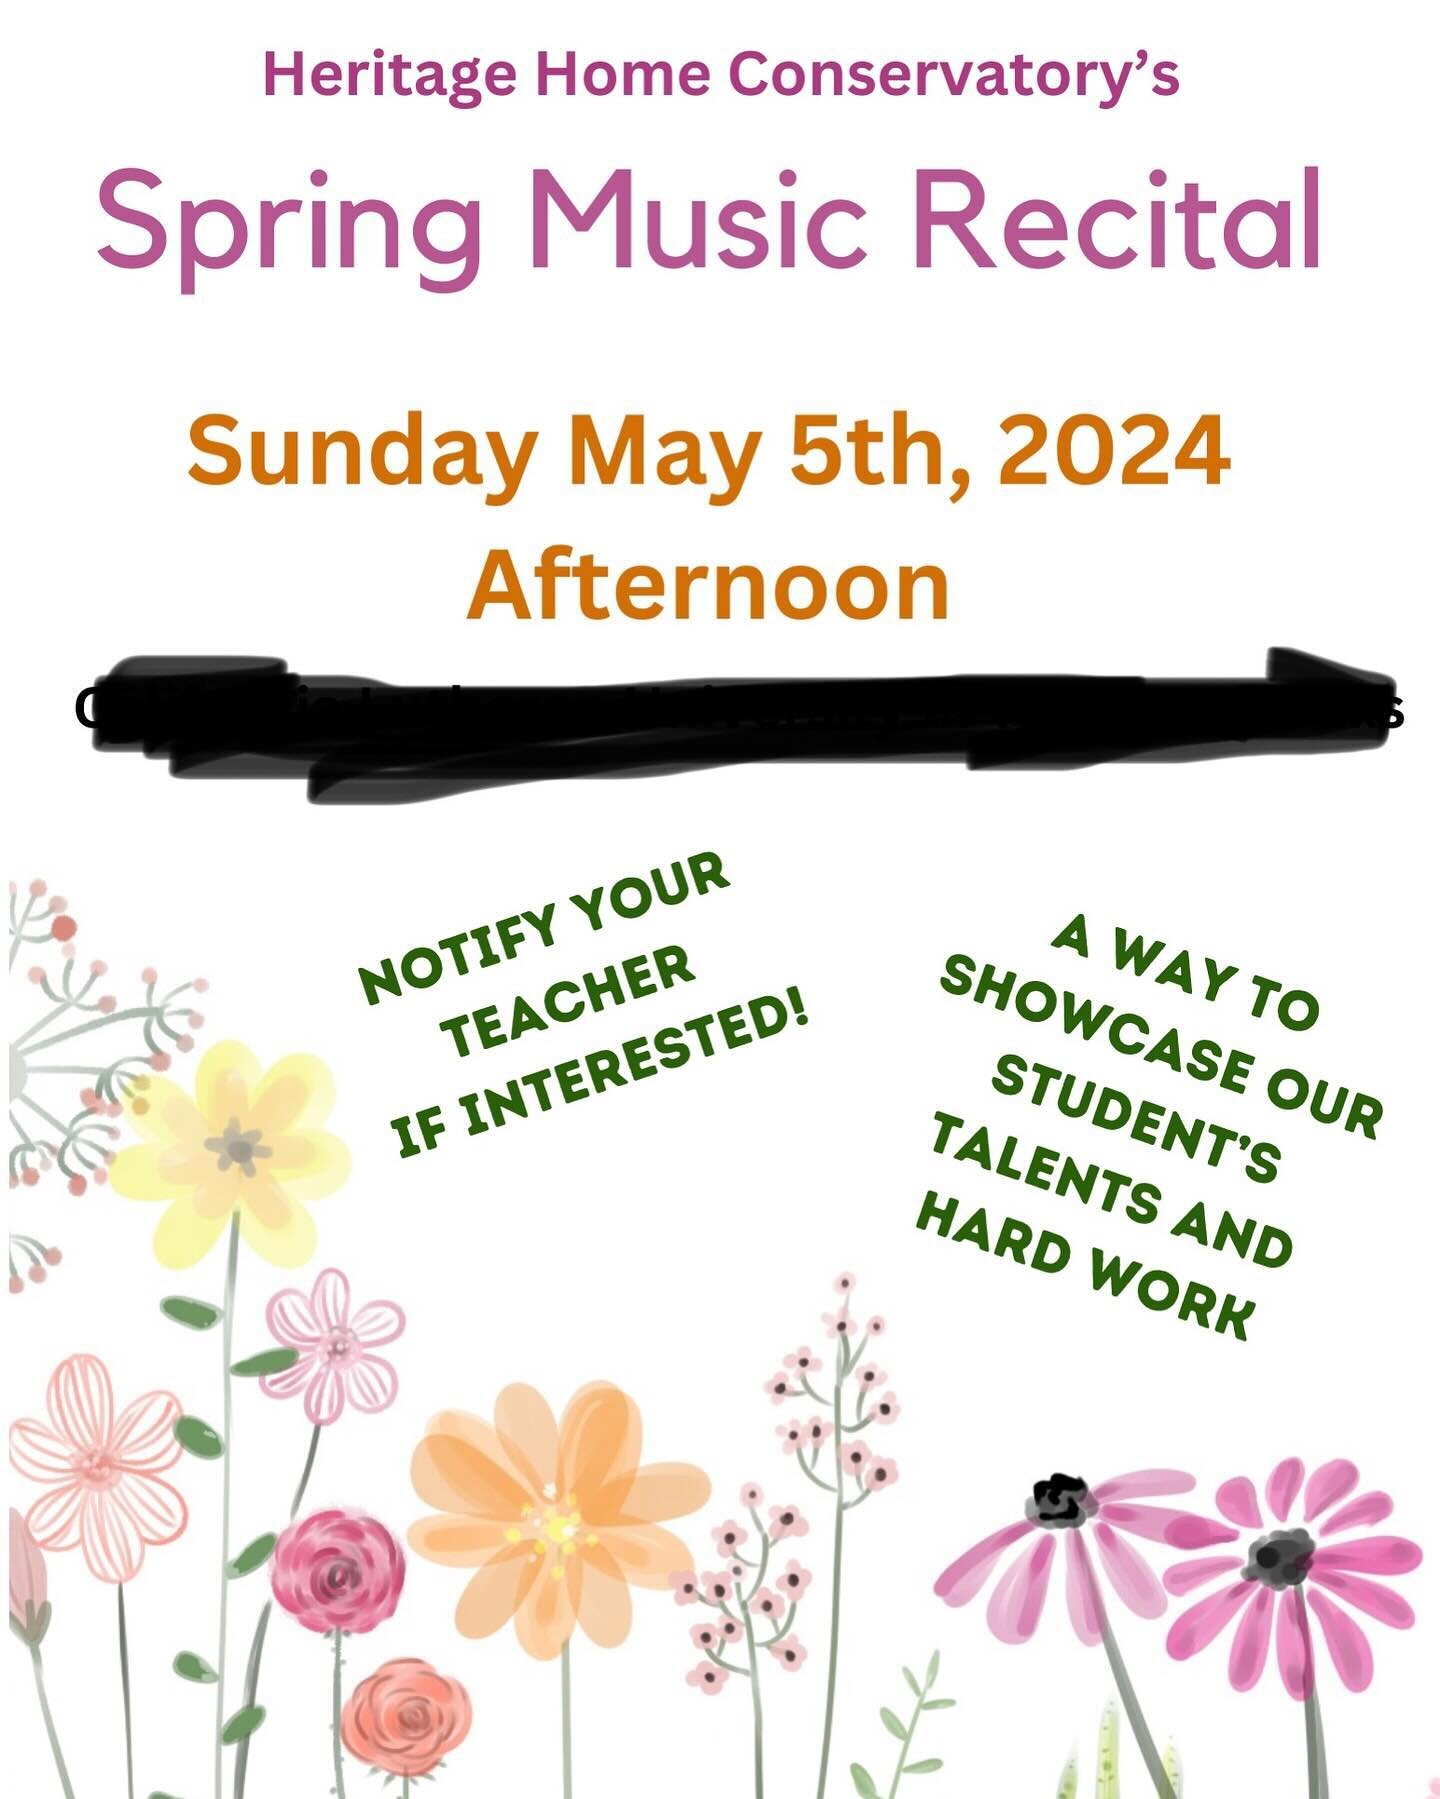 Looking forward to our Spring Music Recital!!! Performing or speaking in front of an audience is an important life skill to have&hellip;it takes courage!!
#springmusicrecital #performingishard #weareheretohelp #musiclessons #pianolessons #guitarlesso